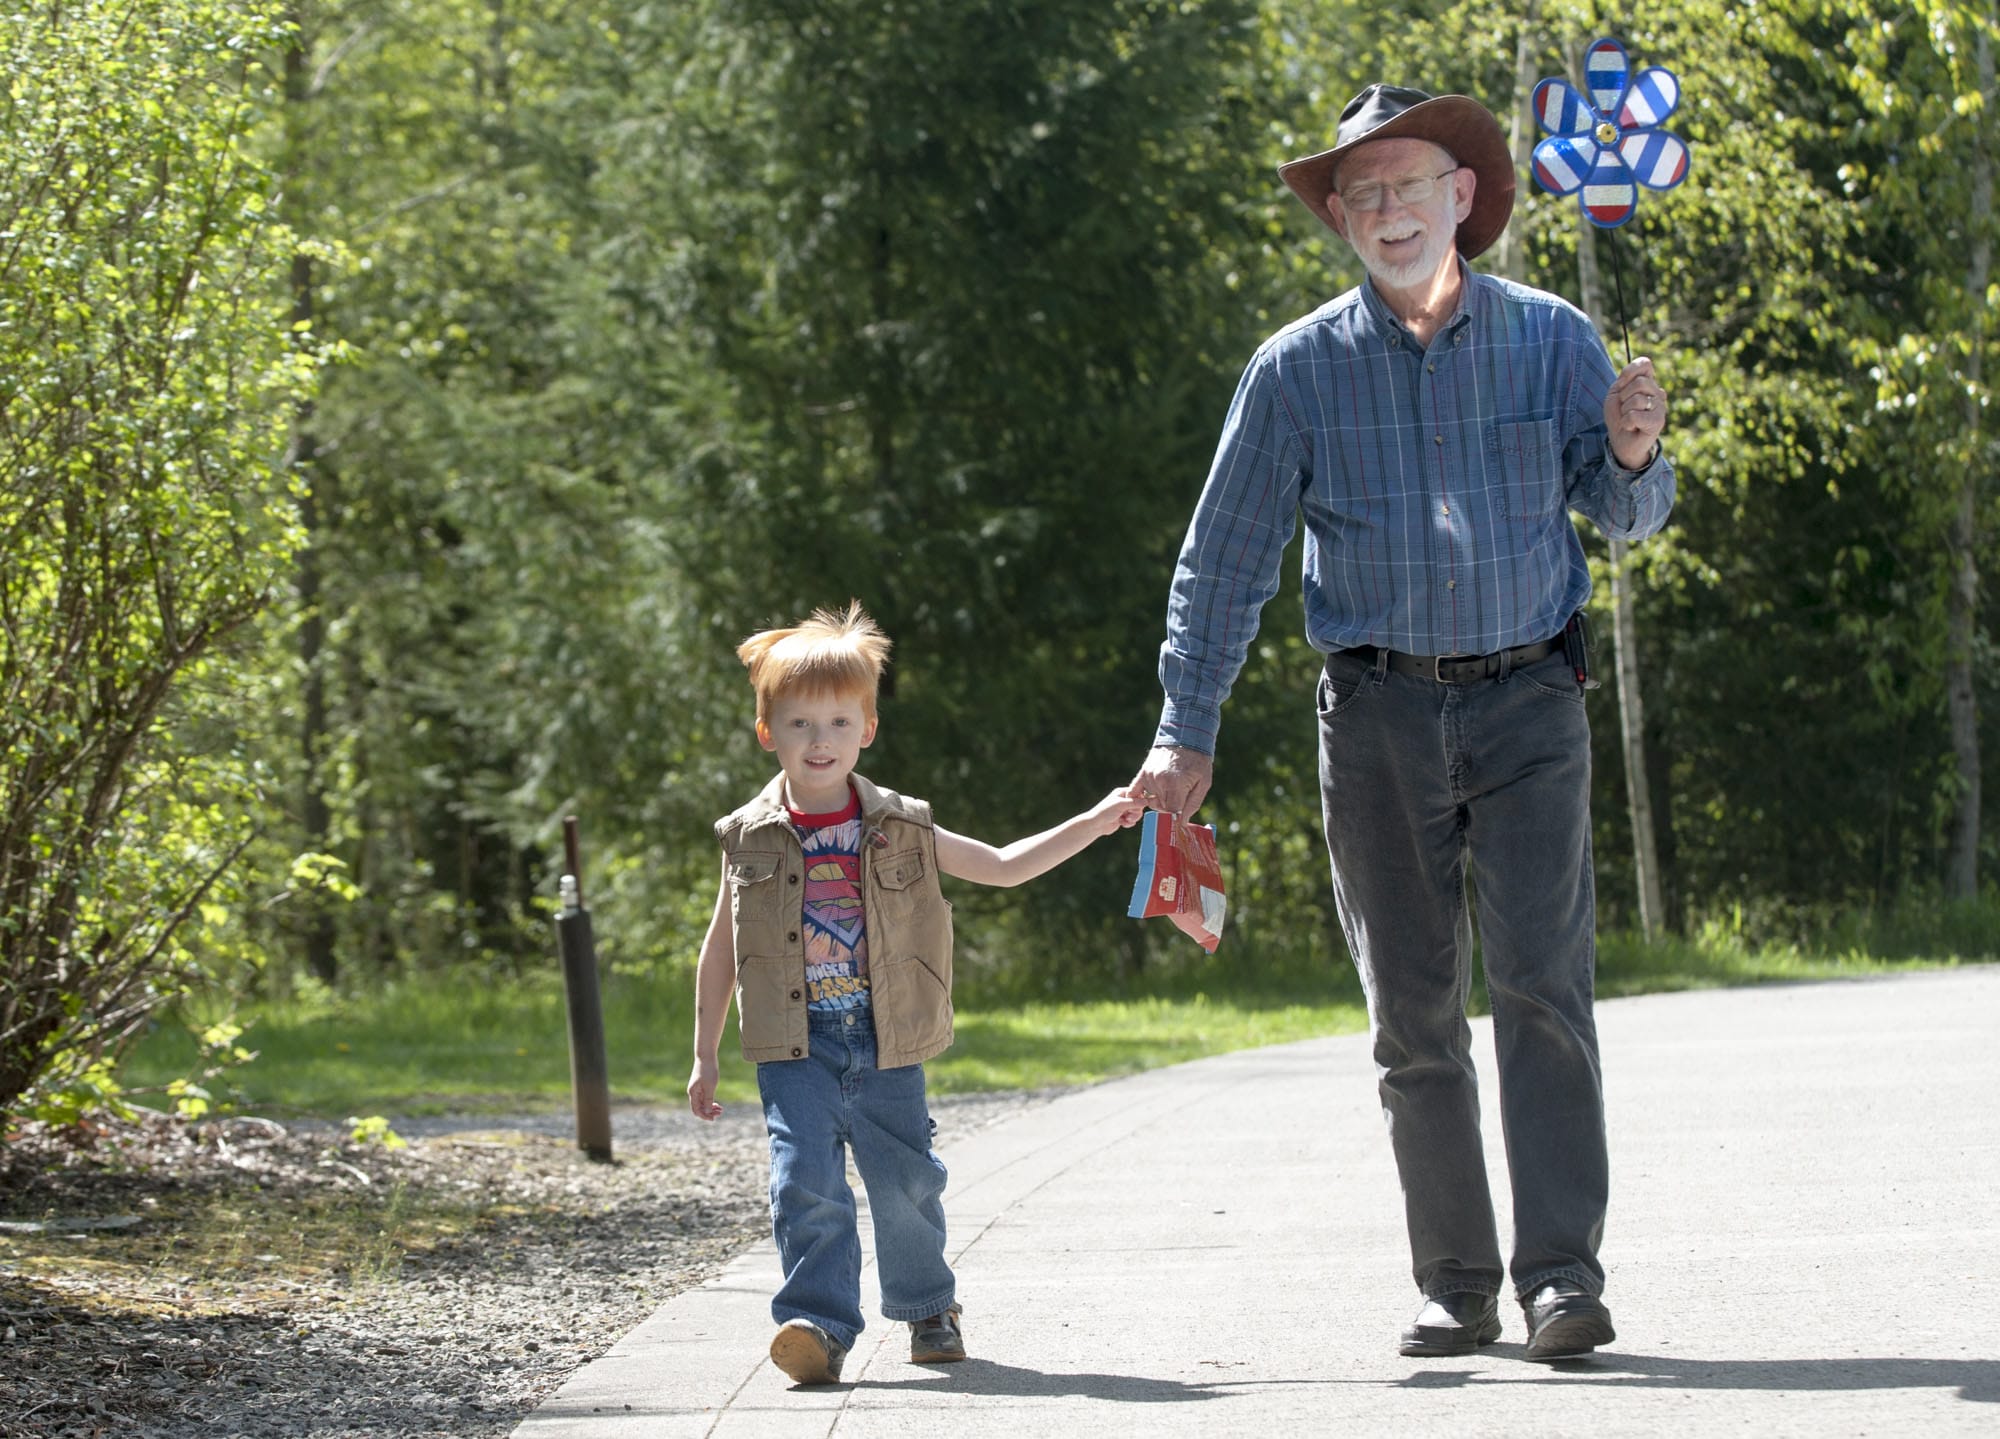 Samuel Eyk and his grandfather, Cal Eyk, stroll along Burnt Bridge Creek Trail in Vancouver on April 15. Samuel was very clear that the pinwheel belonged to him.